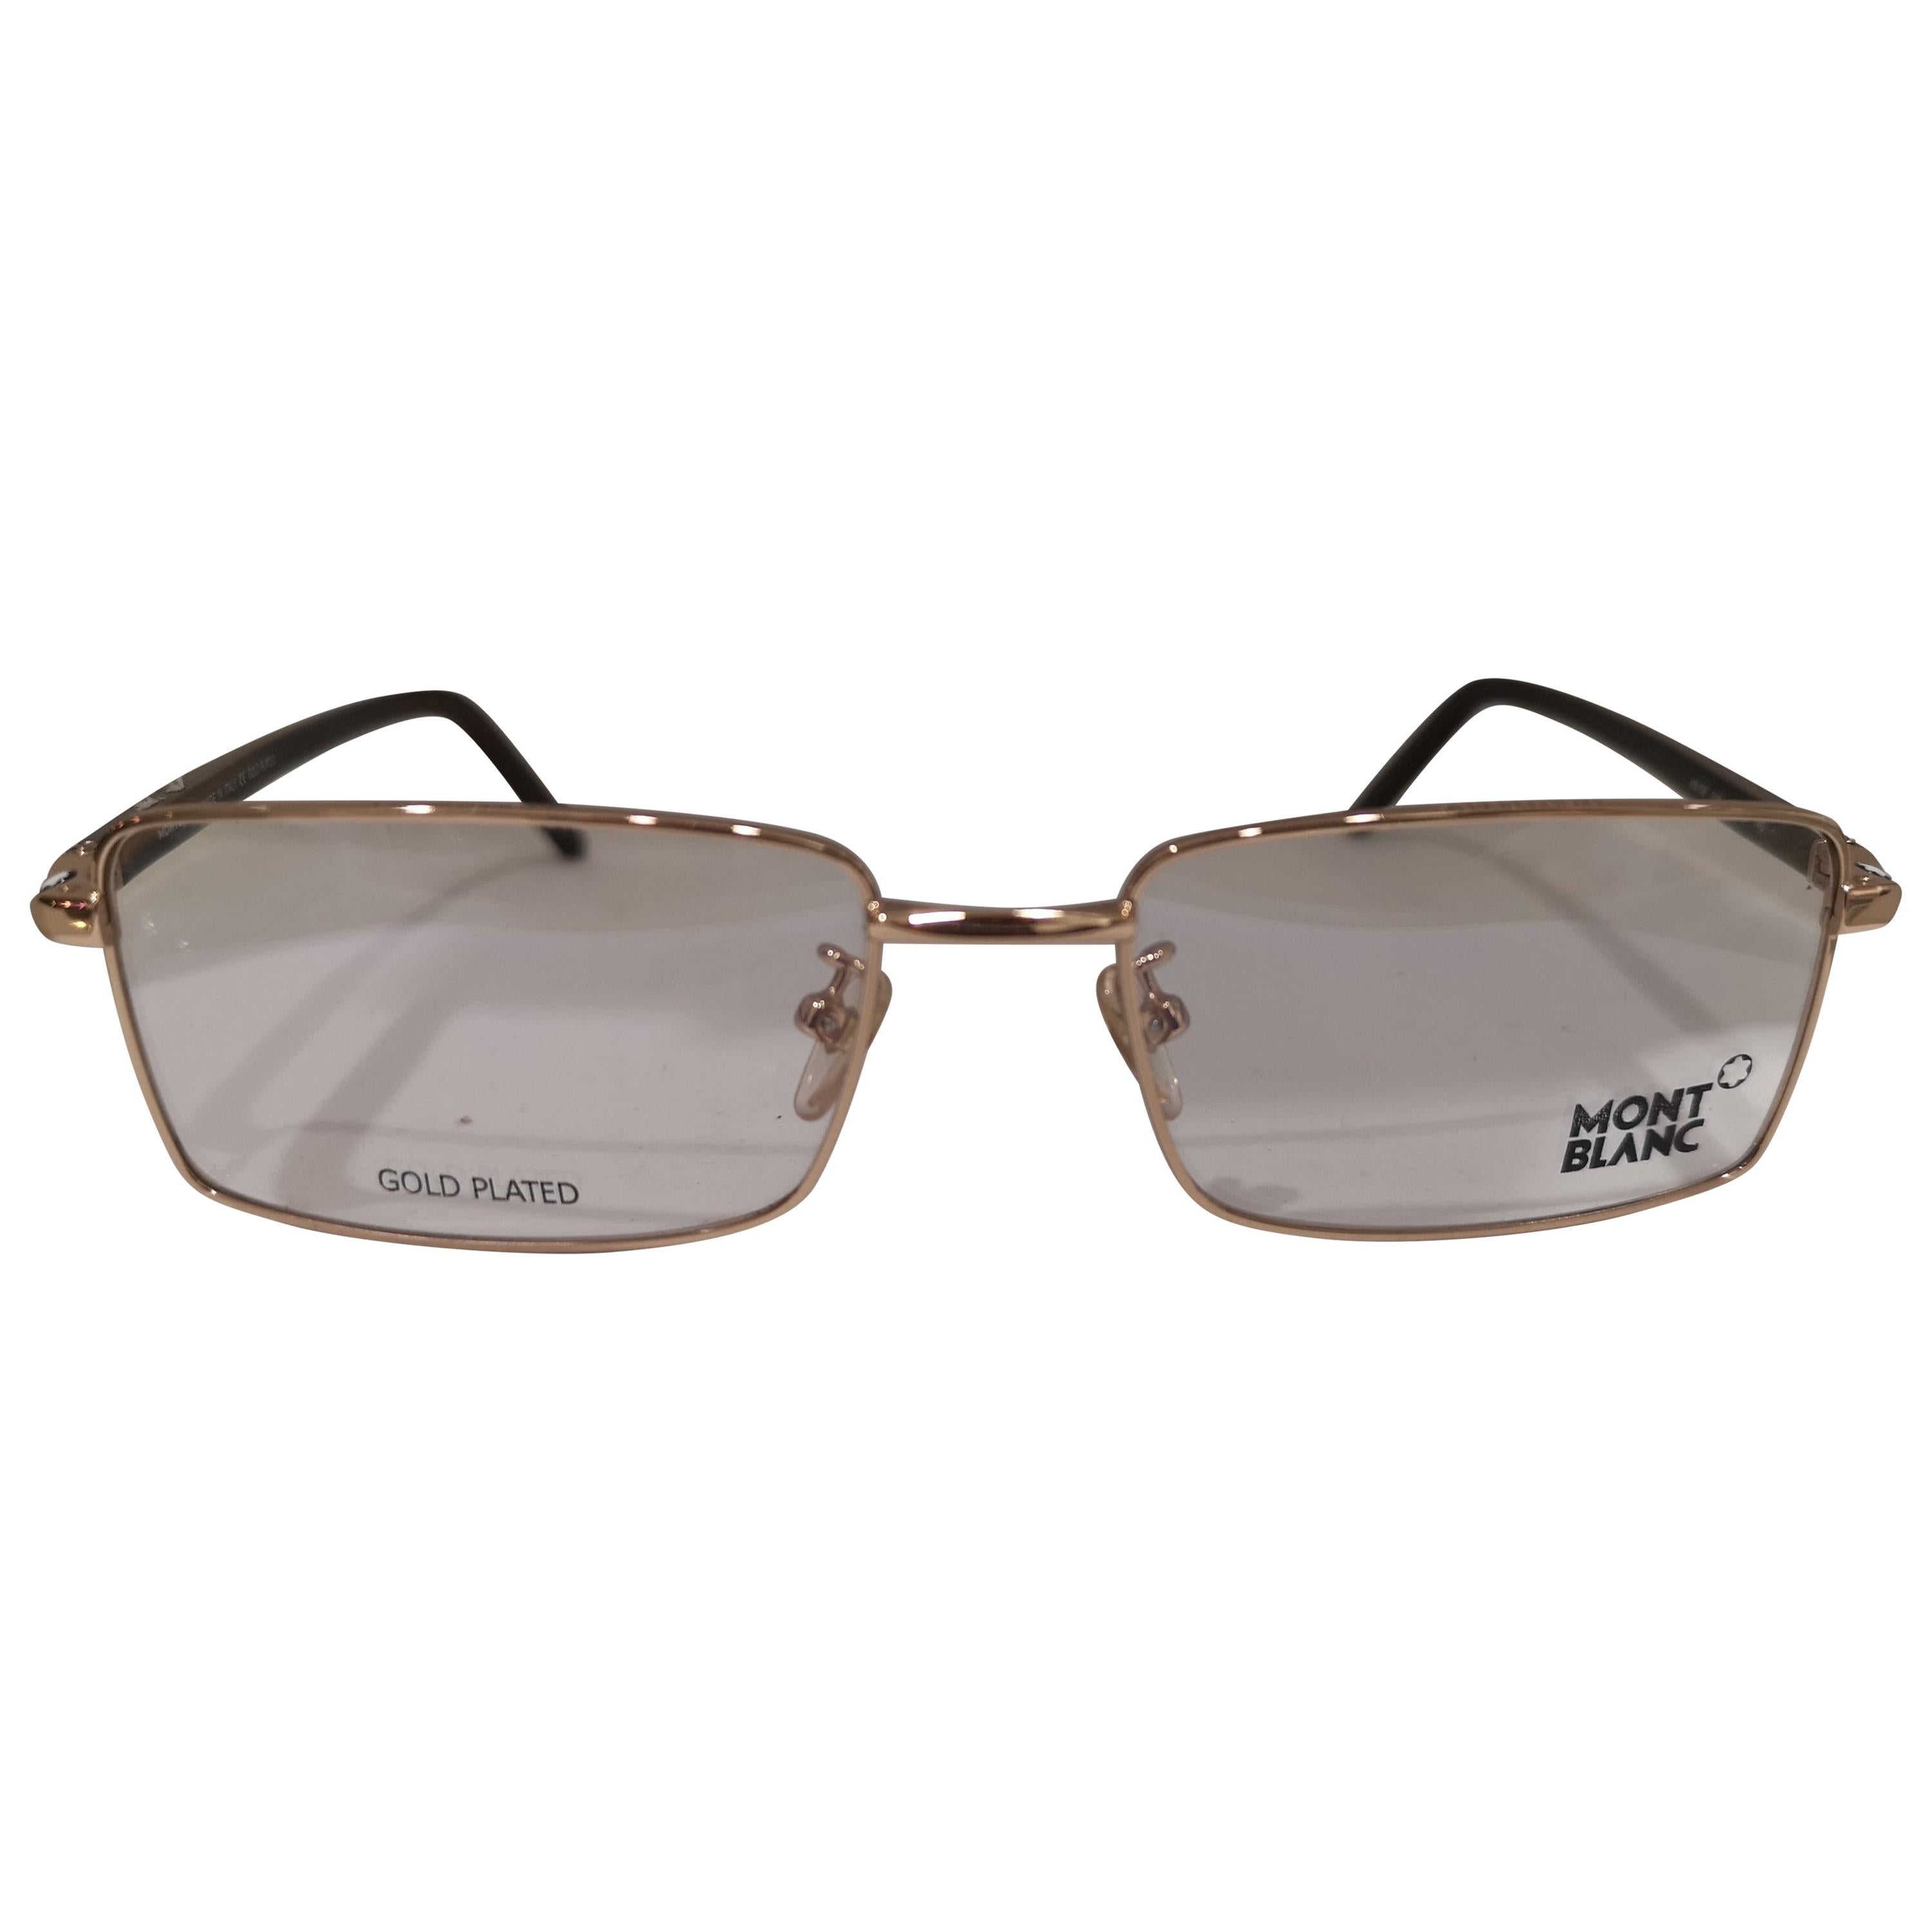 Mont Blanc gold plated glasses frames  For Sale